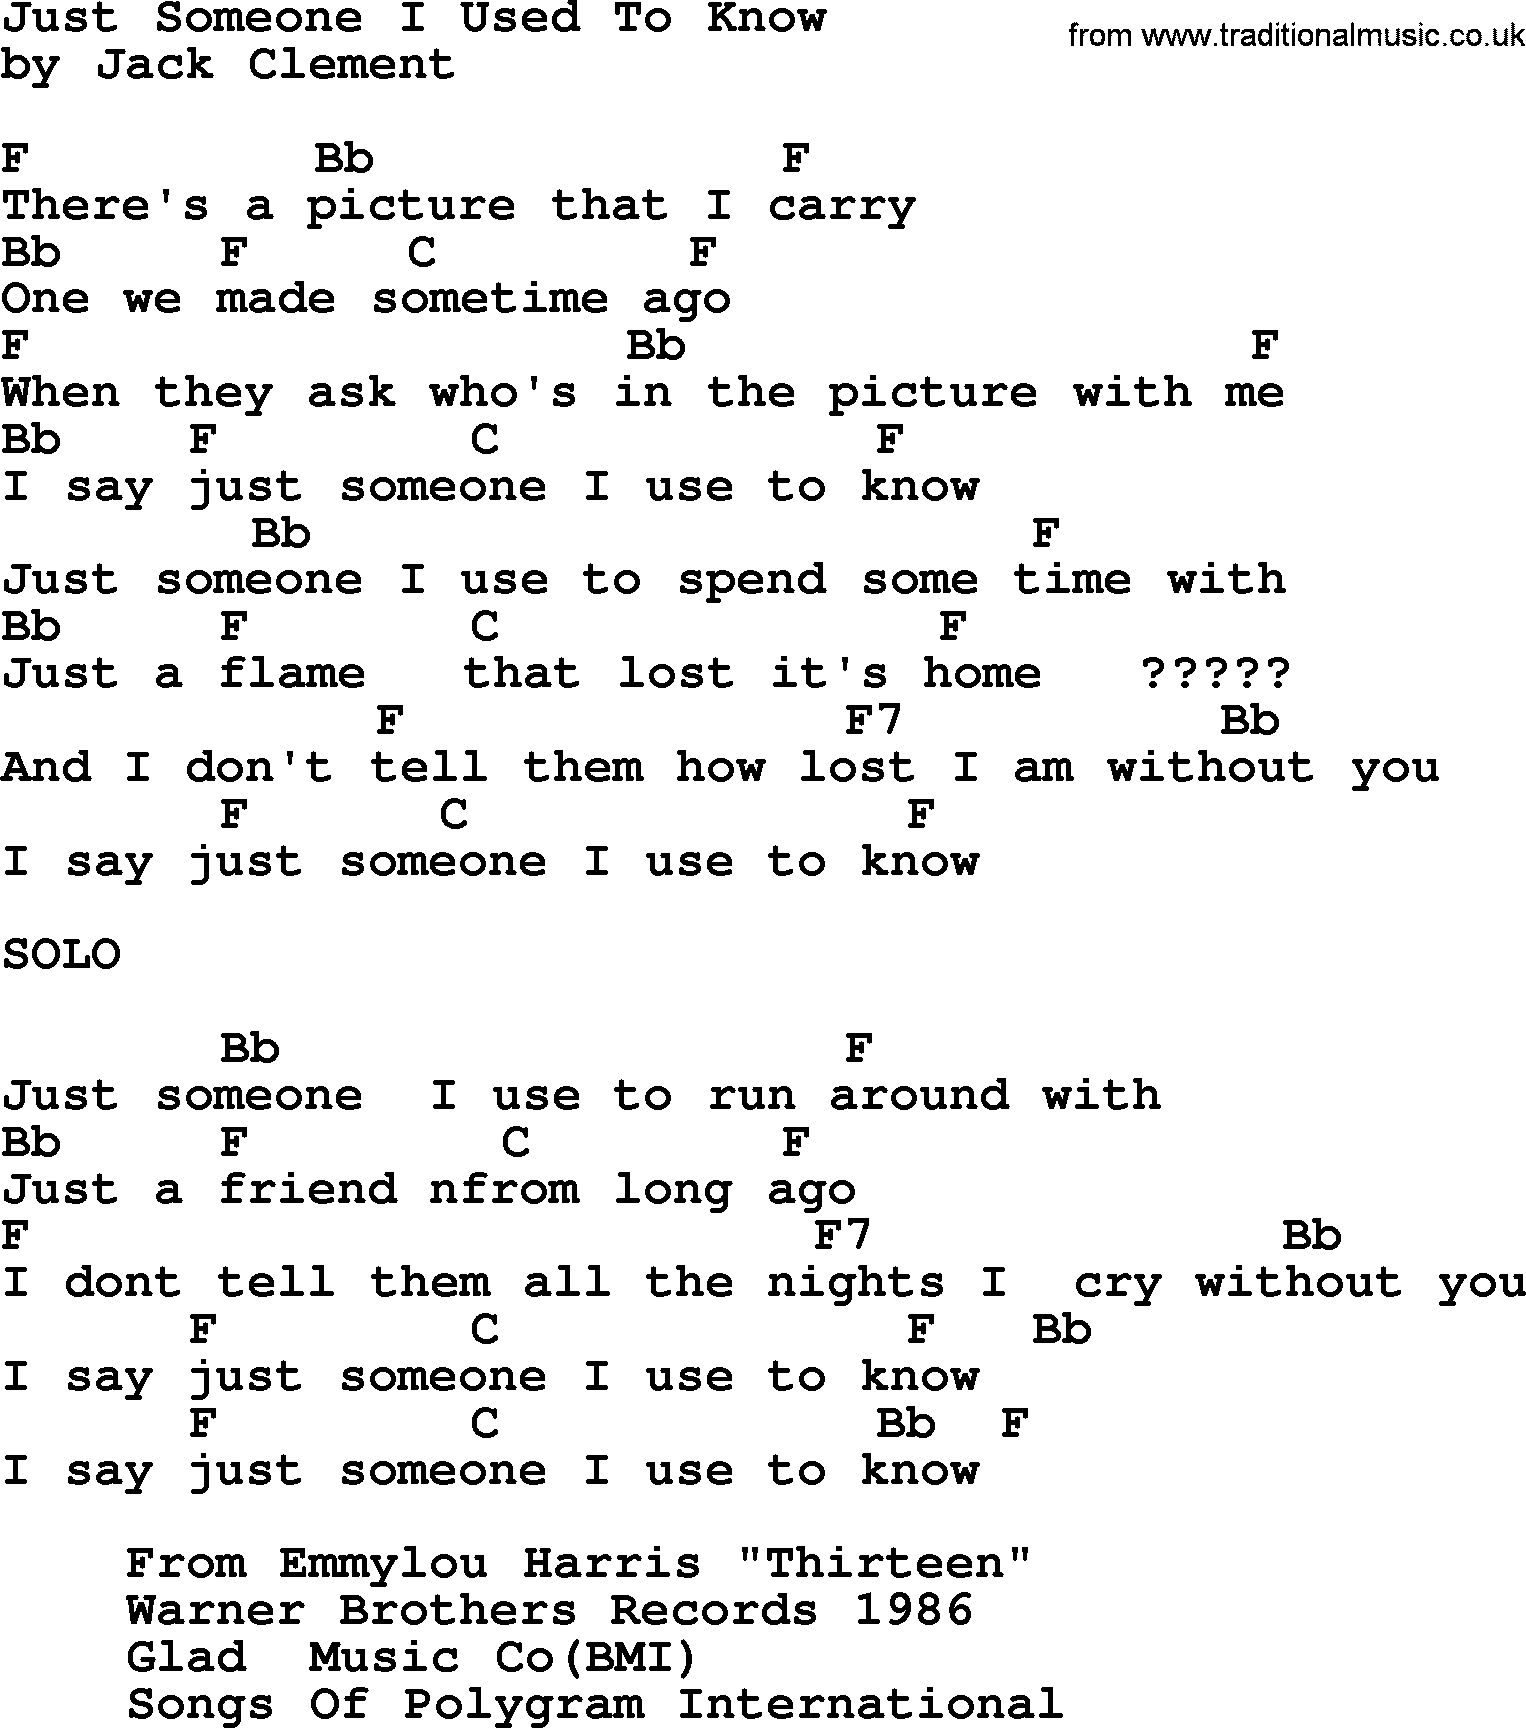 Emmylou Harris song: Just Someone I Used To Know lyrics and chords